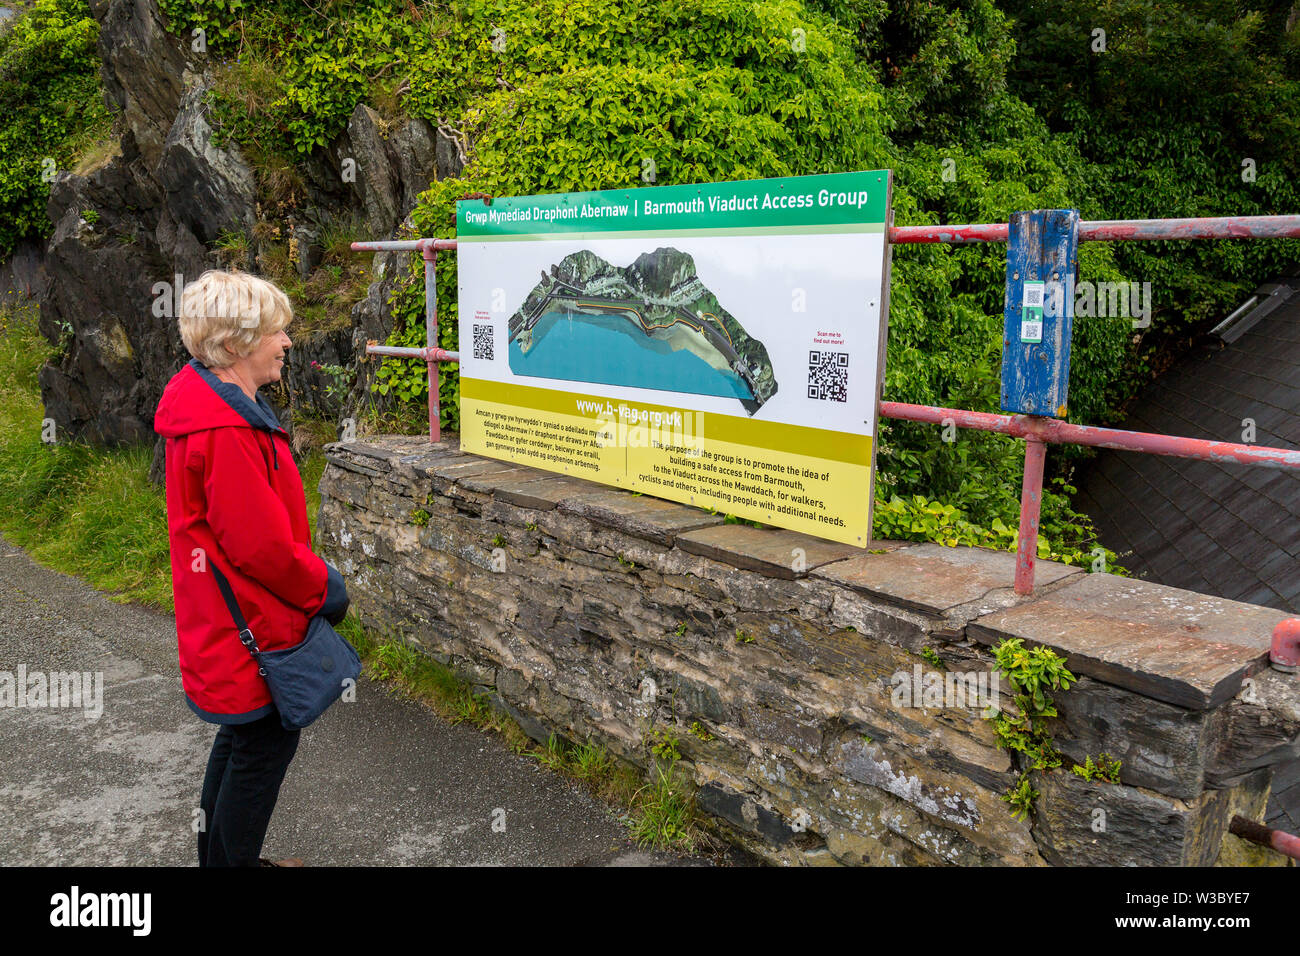 Information board about the historic railway bridge across the Mawddach estuary viewed from the harbour in Barmouth, Gwynedd, Wales, UK Stock Photo